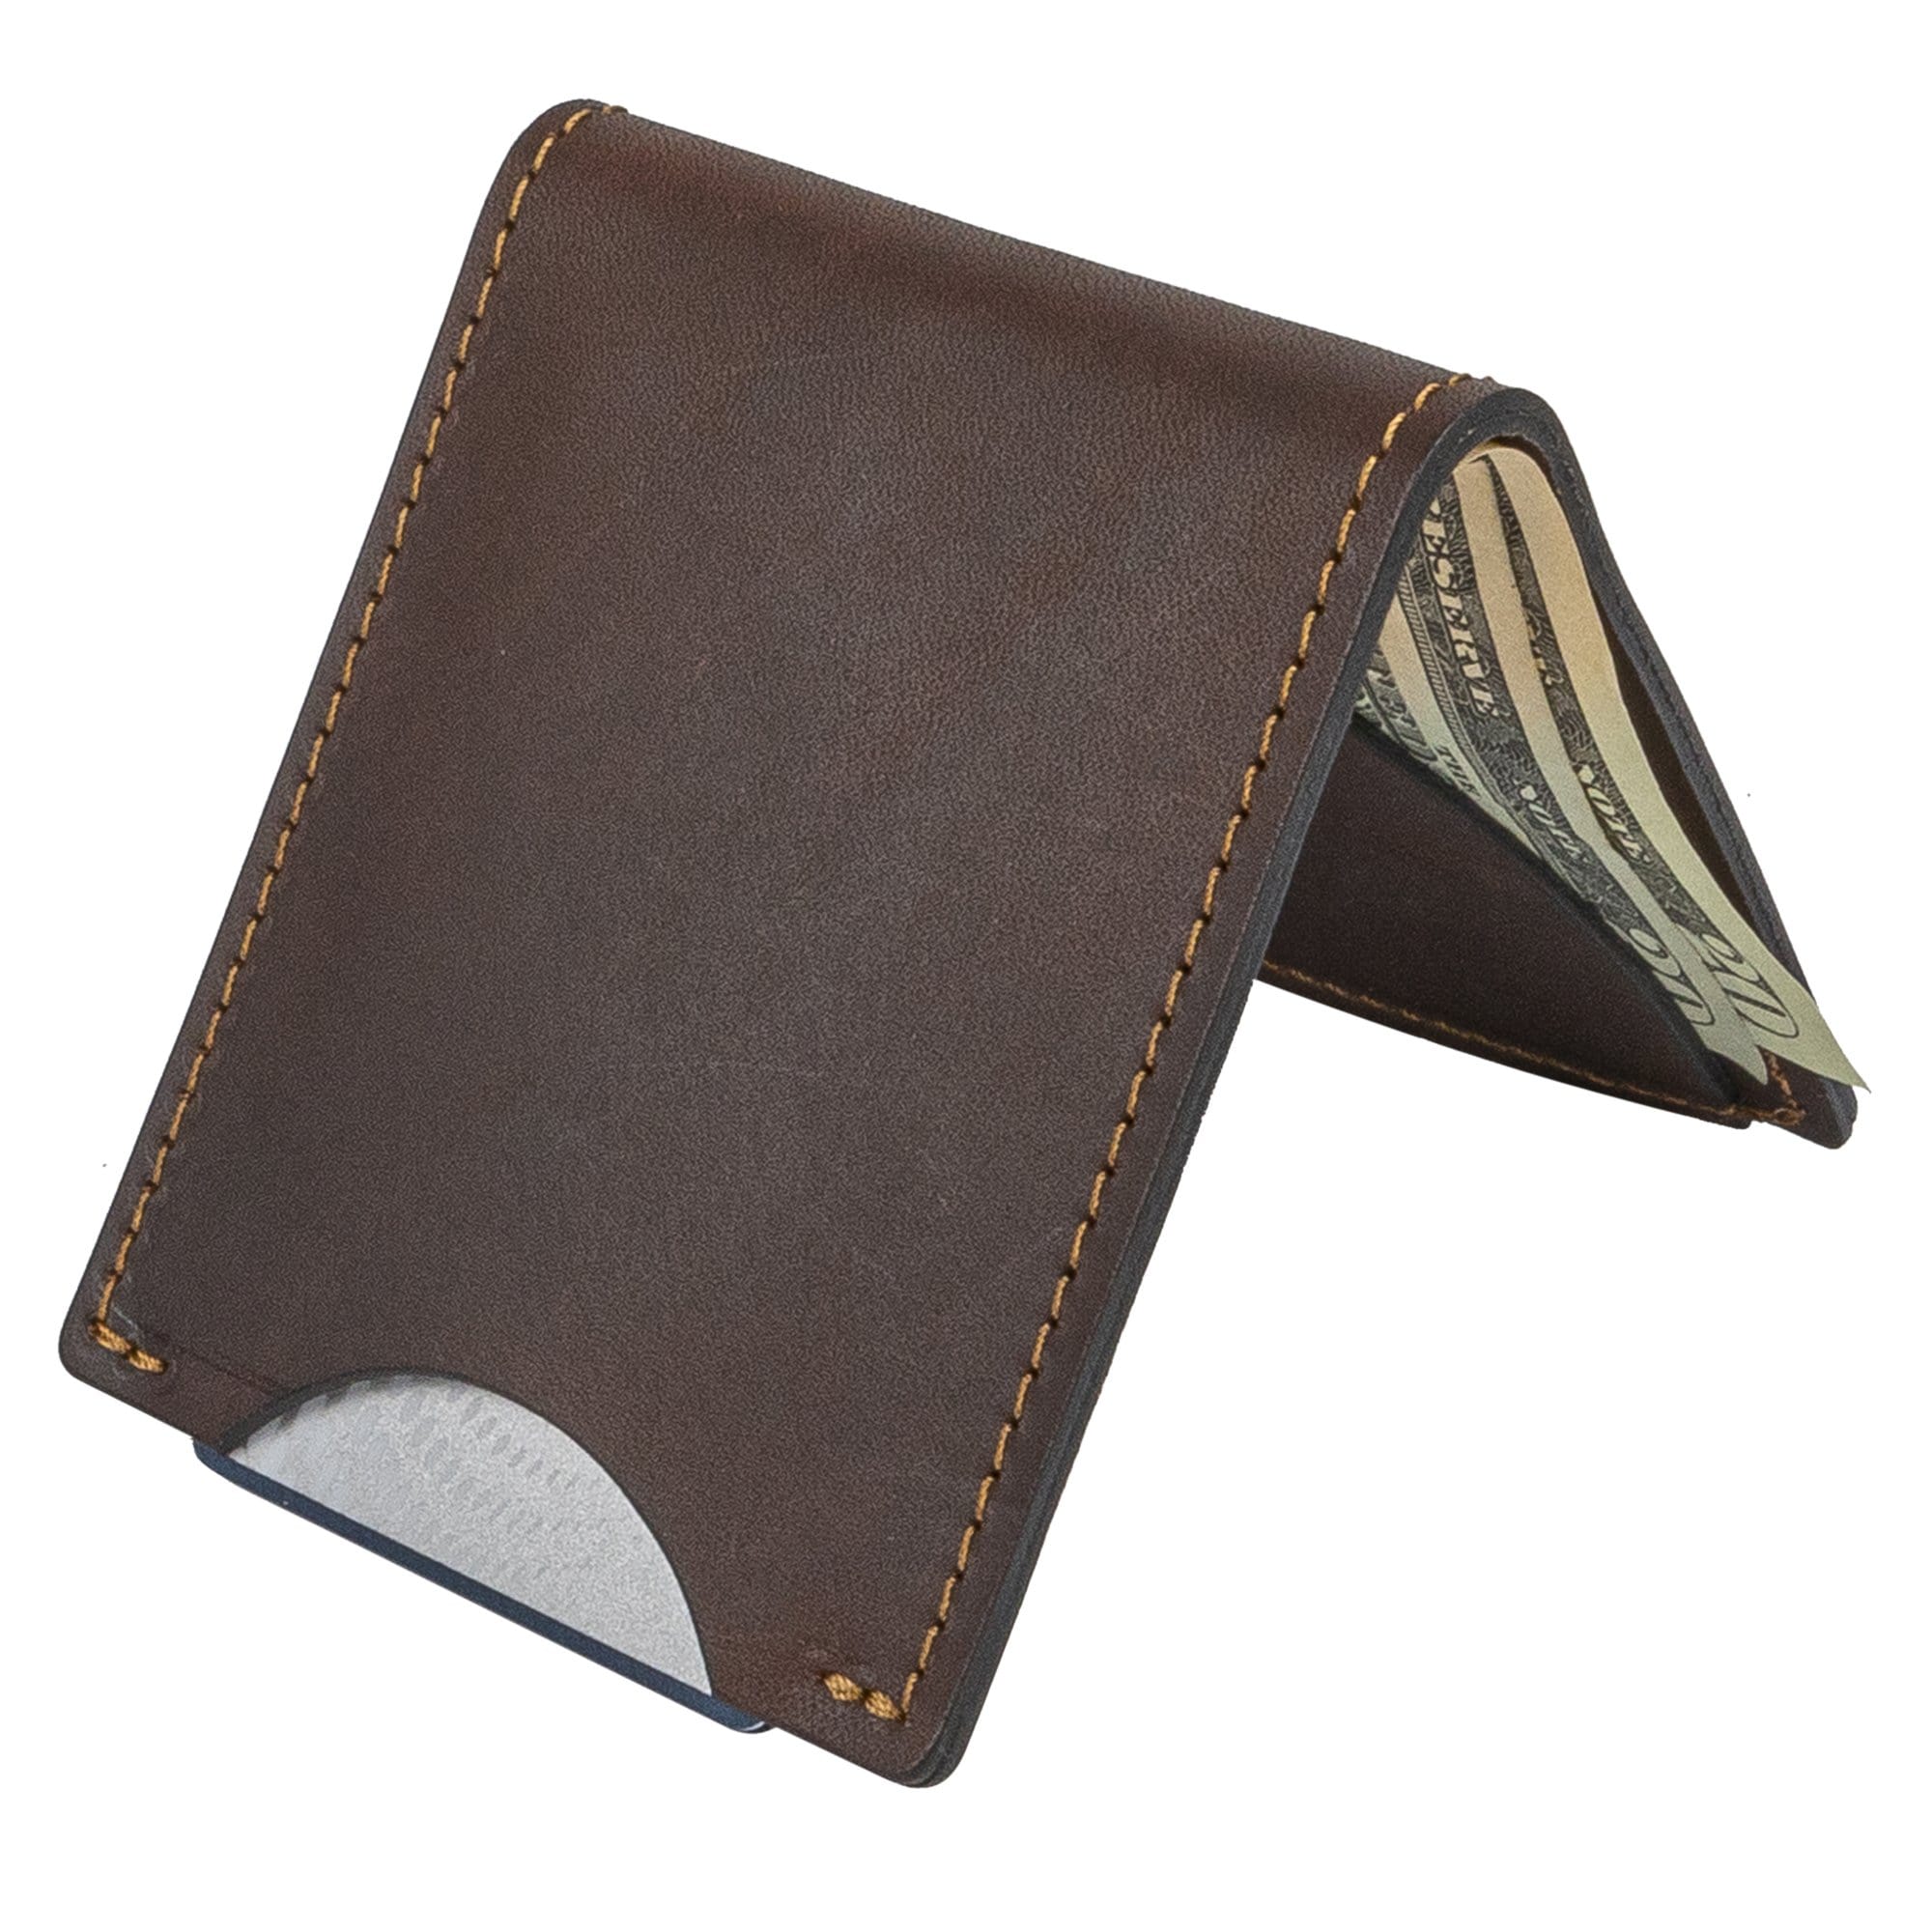 Main Street Forge - Full Grain Leather Wallets